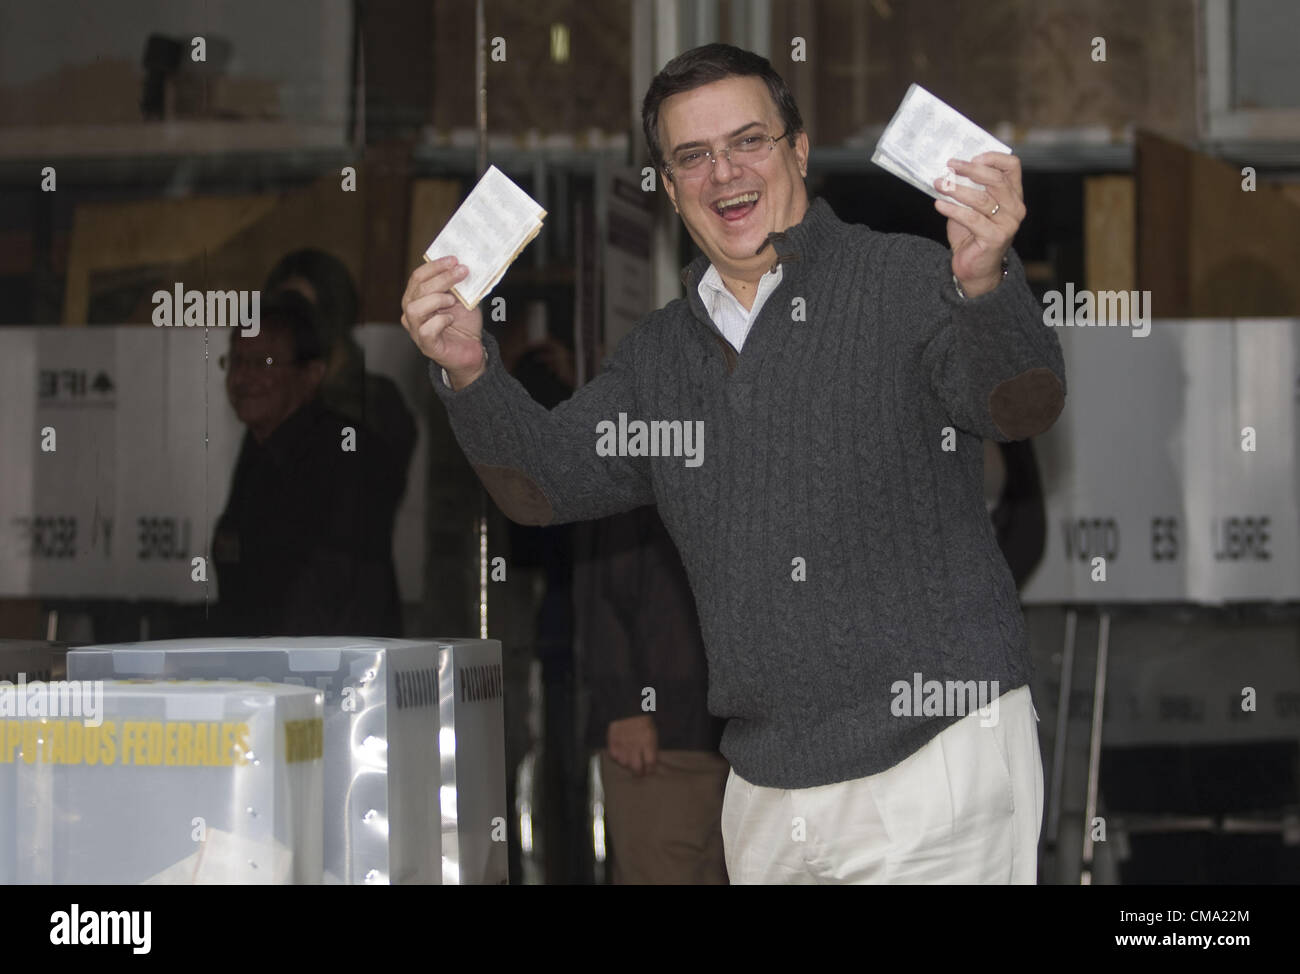 June 30, 2012 - Mexico, Distrito Federal, MEX - Mexico City's mayor, Marcelo Ebrad casts his vote in the general election in Mexico City, Mexico Sunday, July 1, 2012.  Mexicans began voting for a new president on Sunday. According to polls, the PRI, holds a sizeable lead in these elections, after losing the top office12 years ago. (Credit Image: © Abril Cabrera/Prensa Internacional/ZUMAPRESS.com) Stock Photo